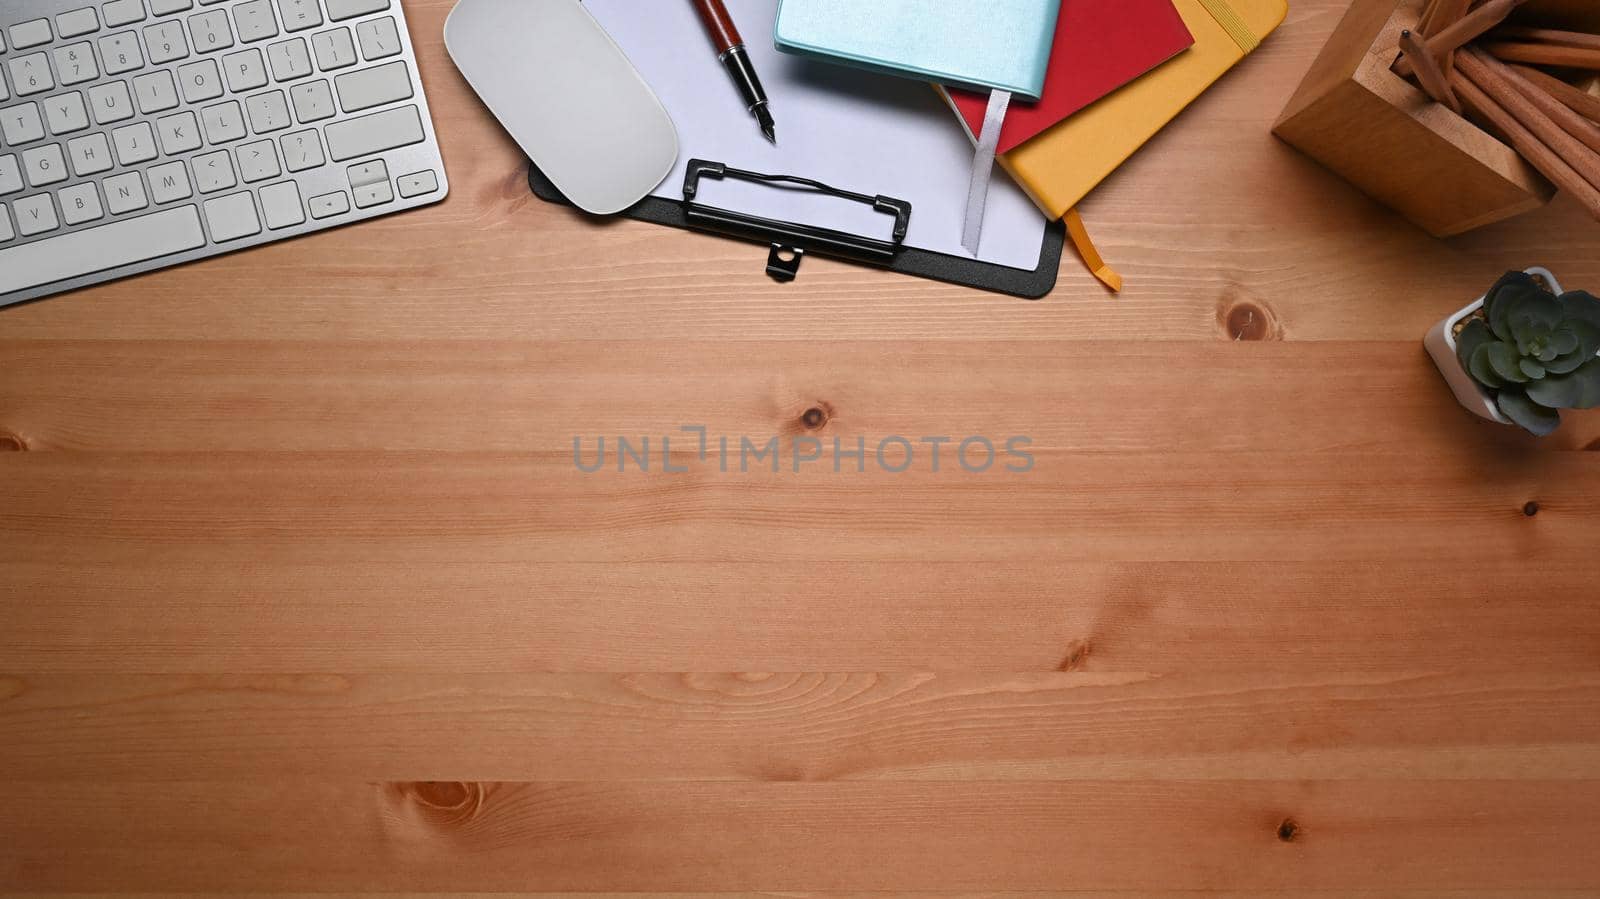 Top view wireless keyboard and office supplies on wooden table. by prathanchorruangsak